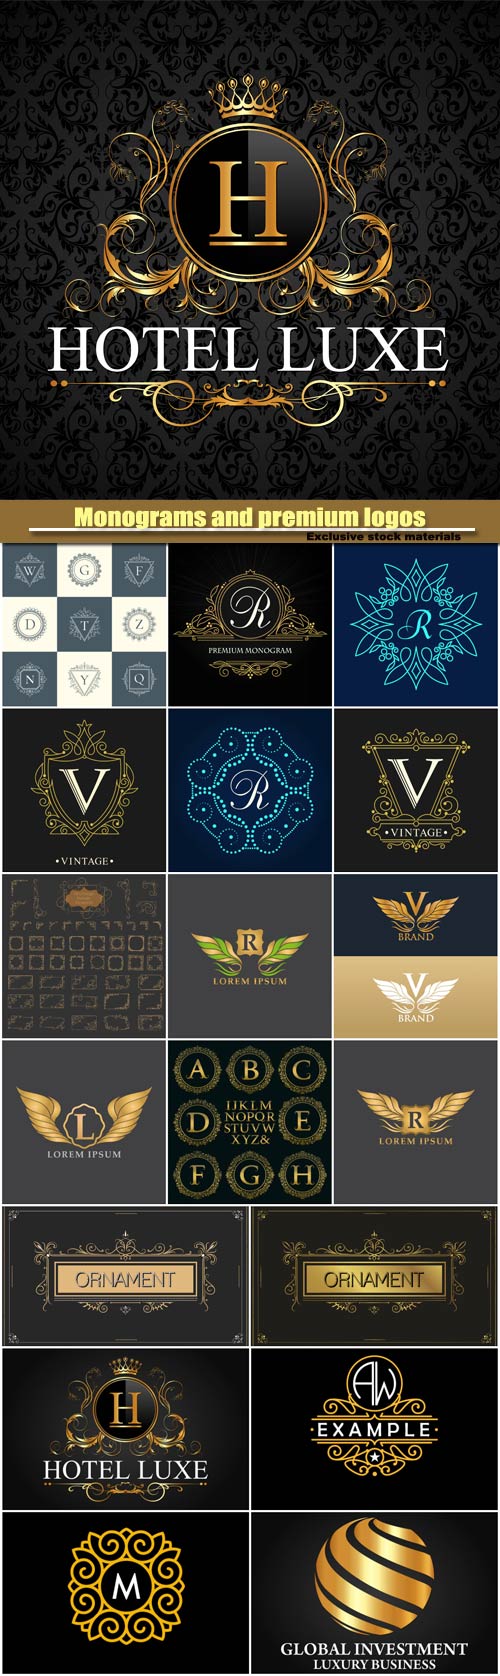 Monograms and premium logos in vector, vintage frames and ornaments